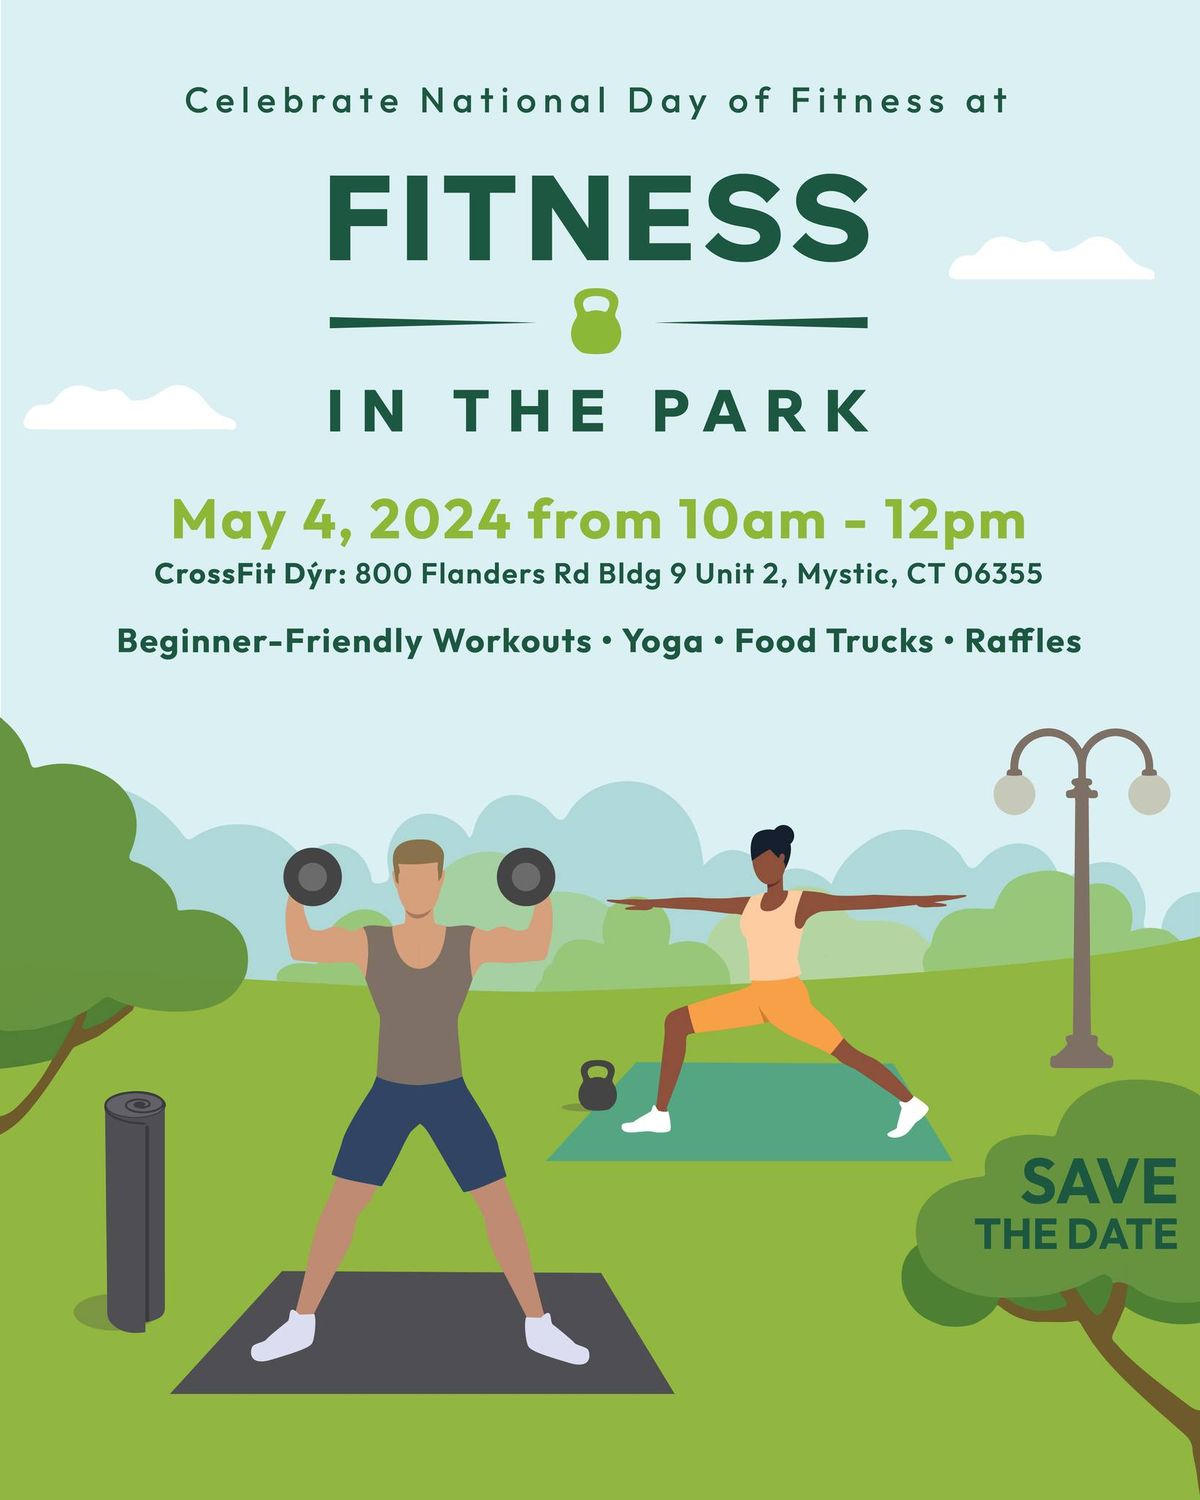 Fitness in the Park - National Day of Fitness